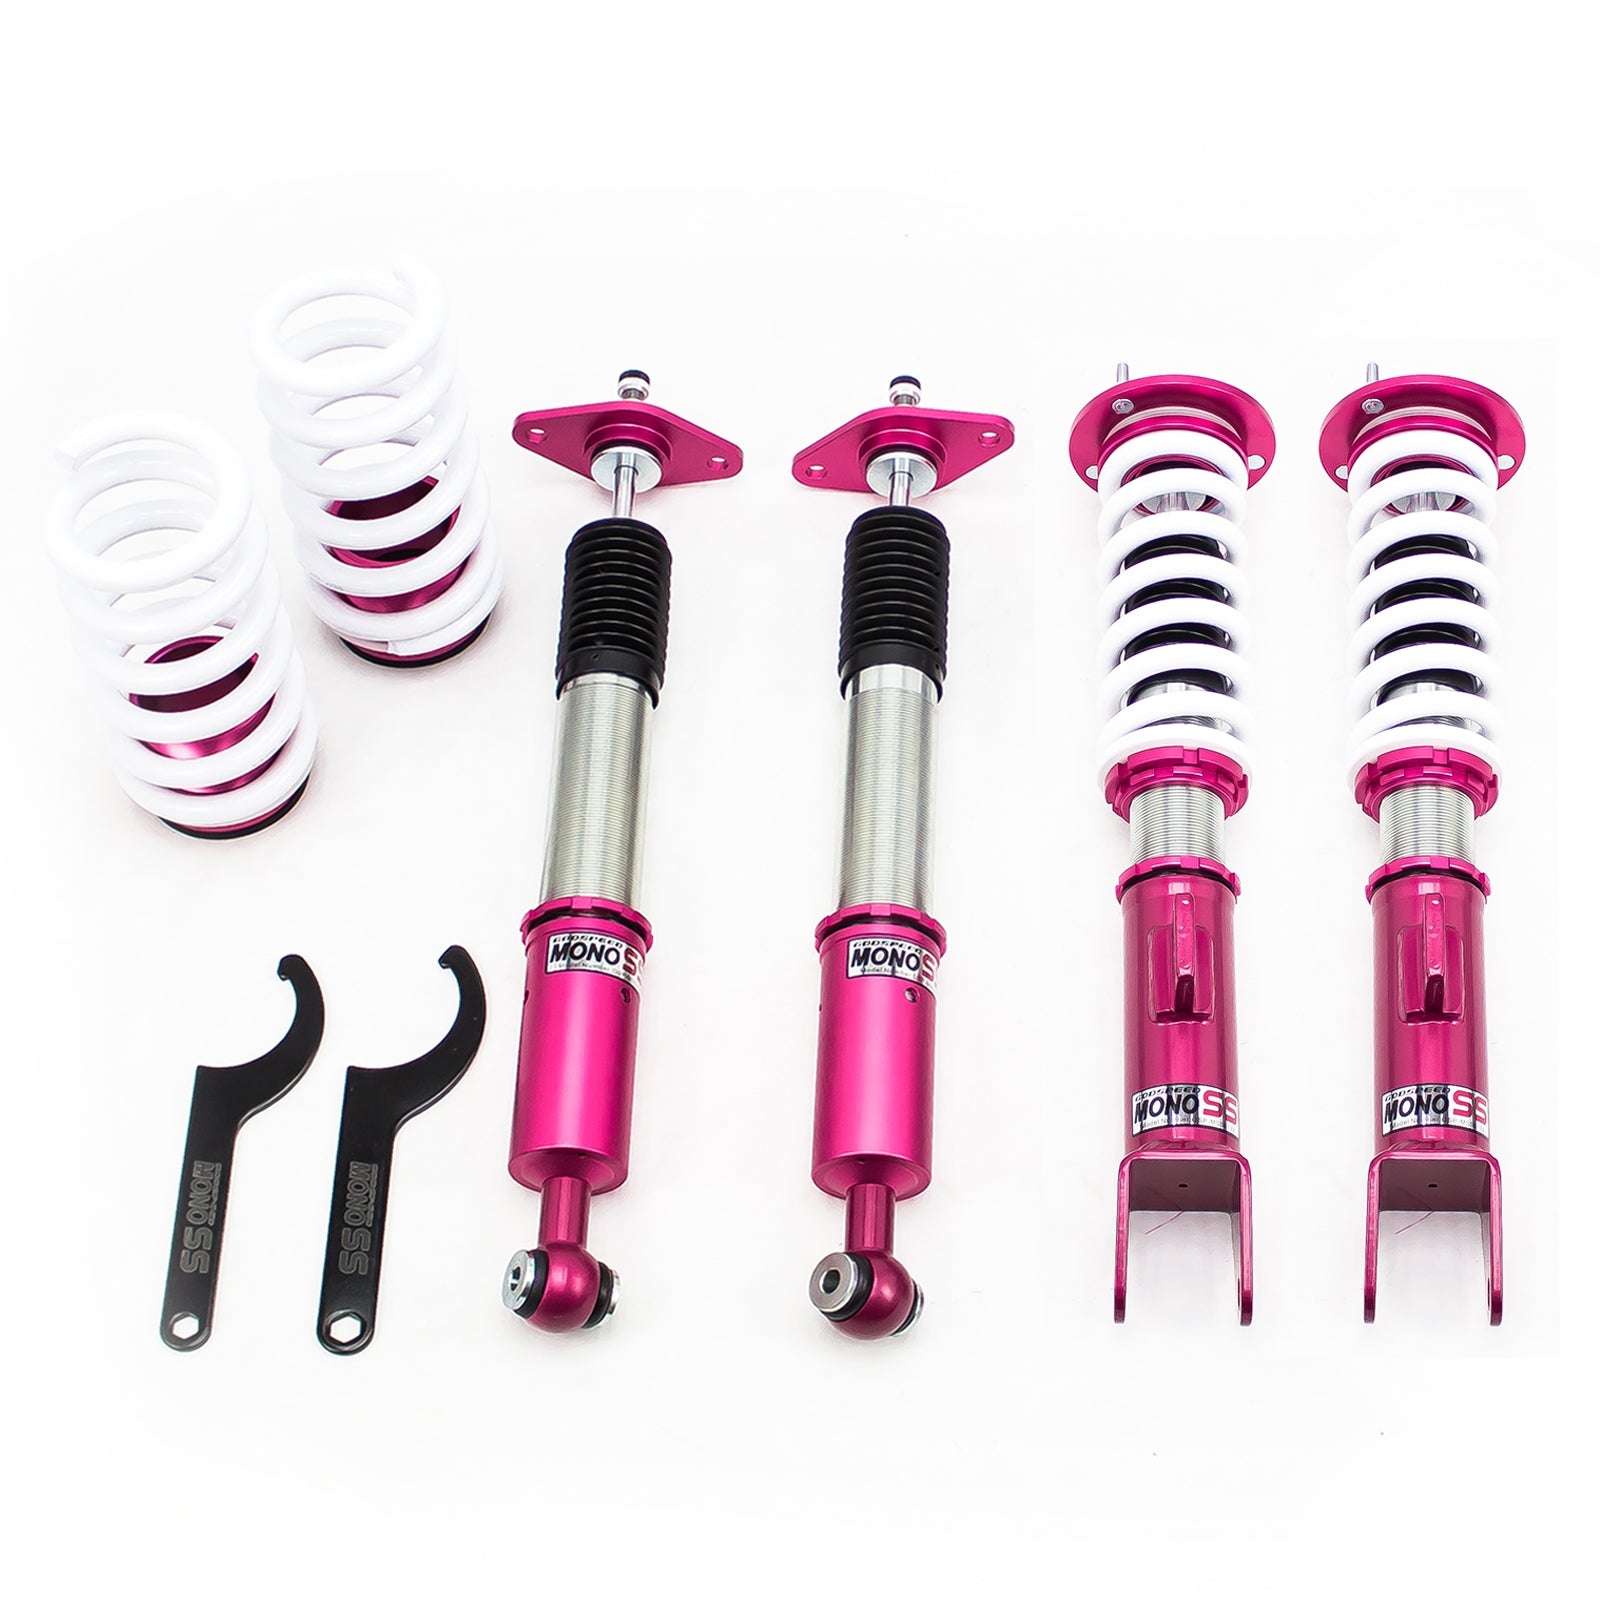 Godspeed MSS0139-C MonoSS Coilover Lowering Kit, Fully Adjustable, Ride Height, Spring Tension And 16 Click Damping, Dodge Challenger 2008-10